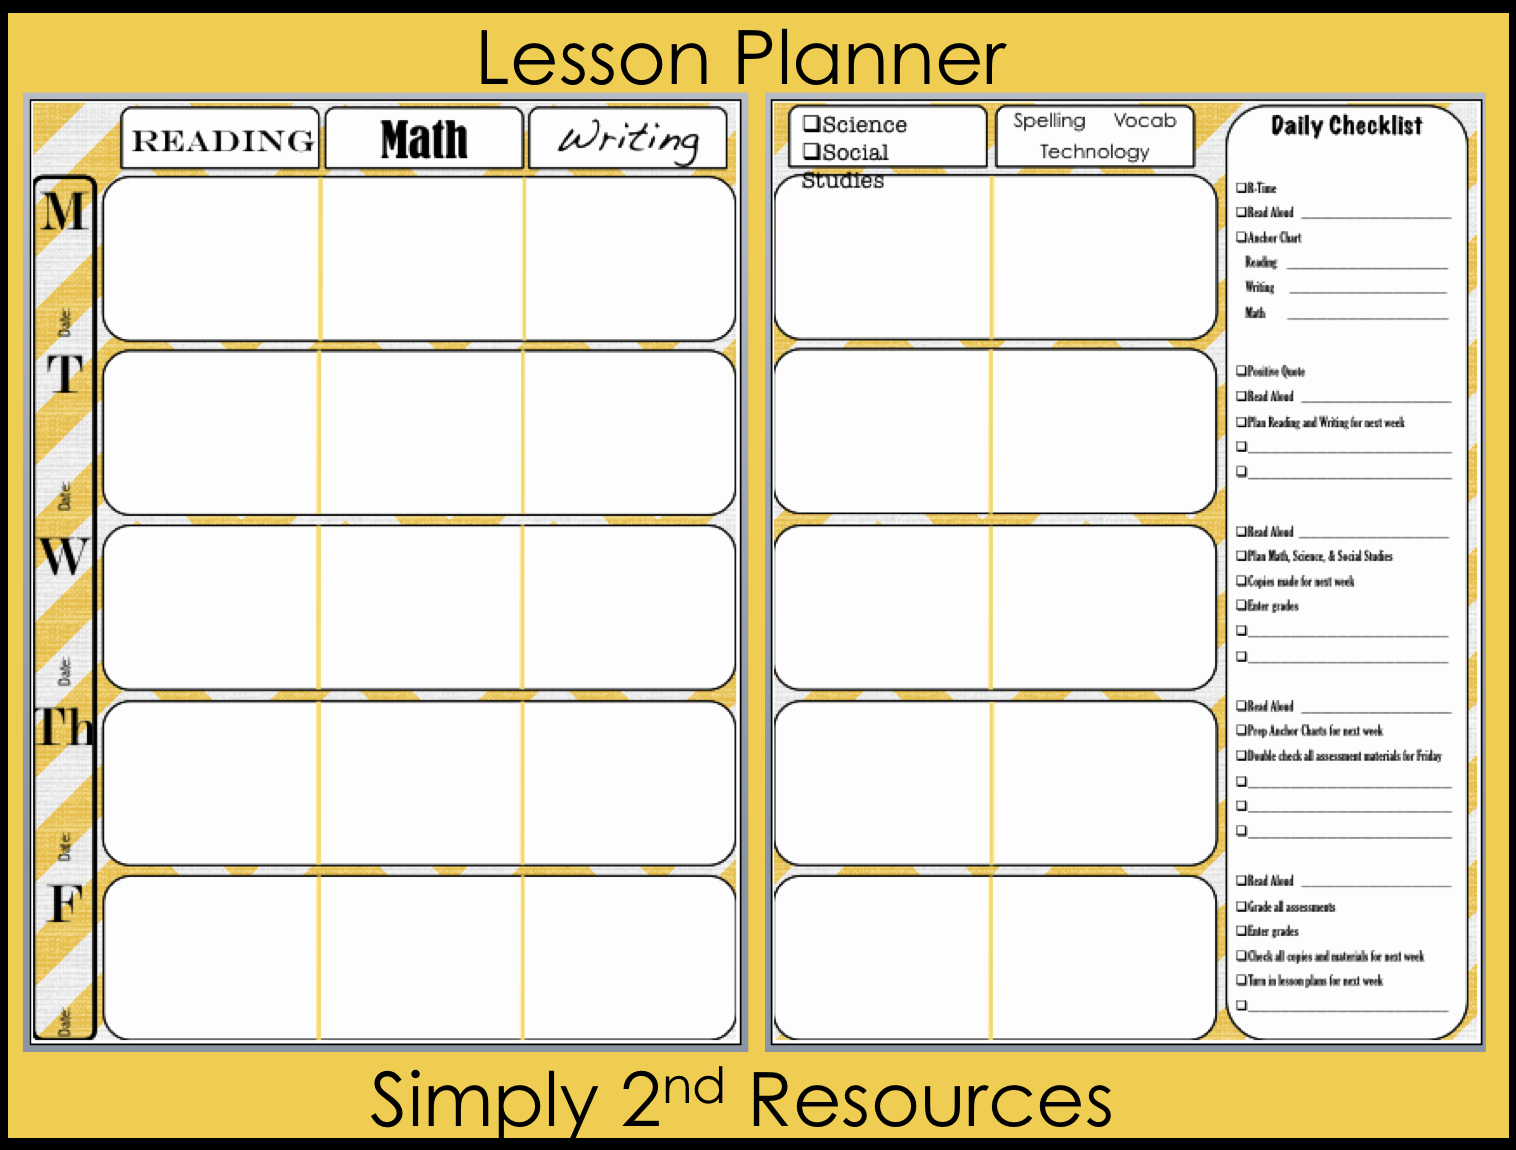 Free Weekly Lesson Plan Template Best Of Simply 2nd Resources Lesson Plan Template so Excited to